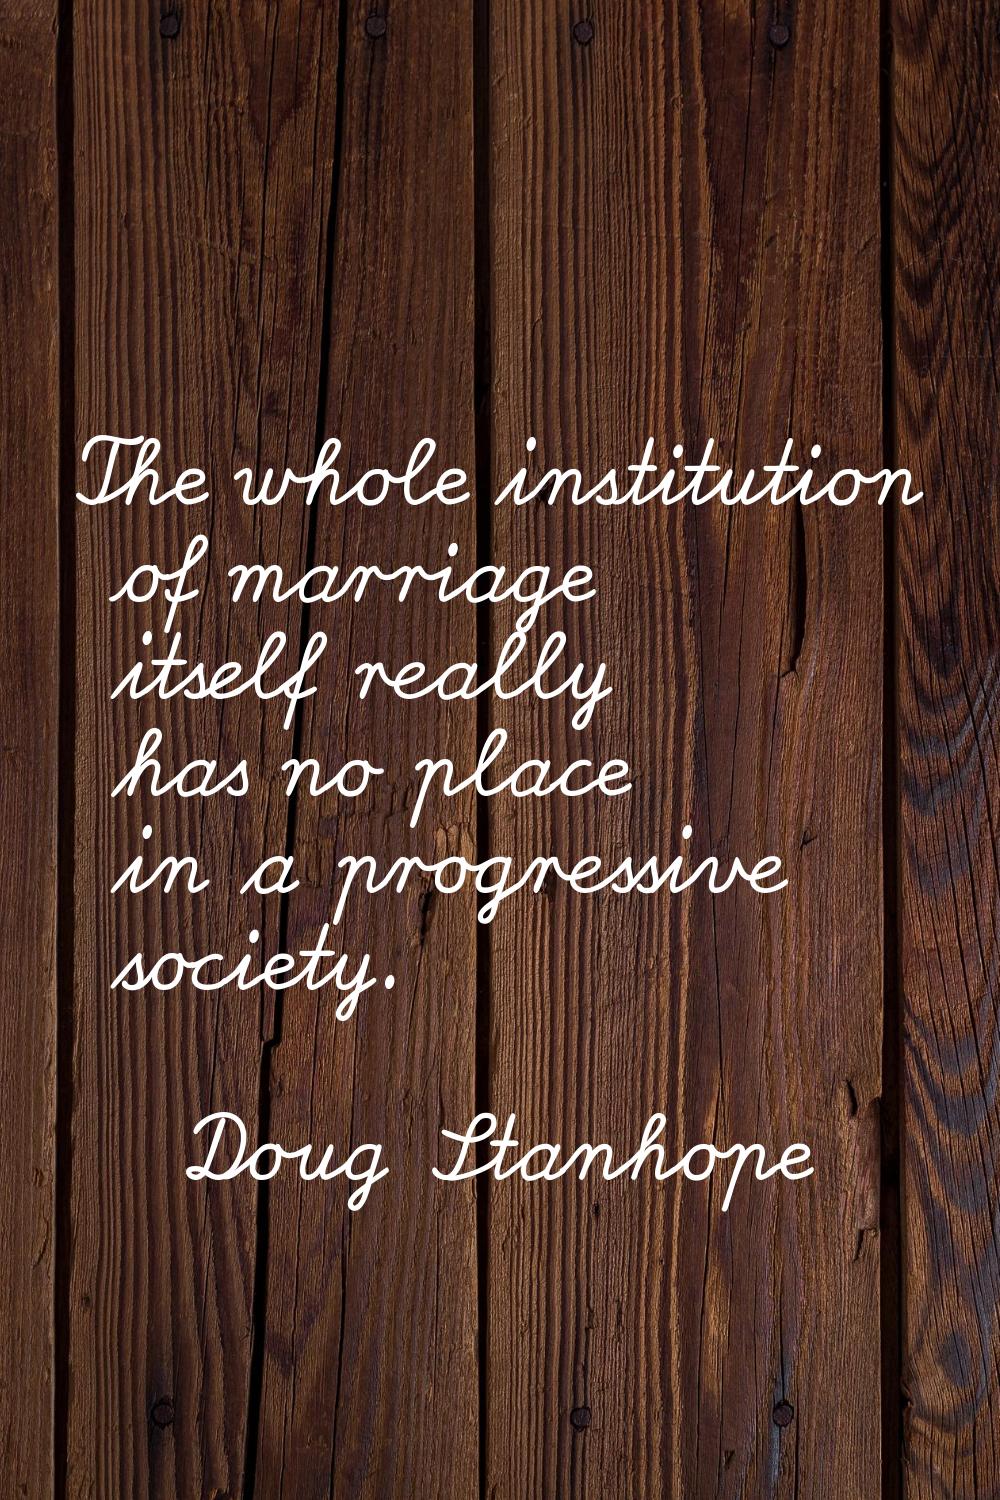 The whole institution of marriage itself really has no place in a progressive society.